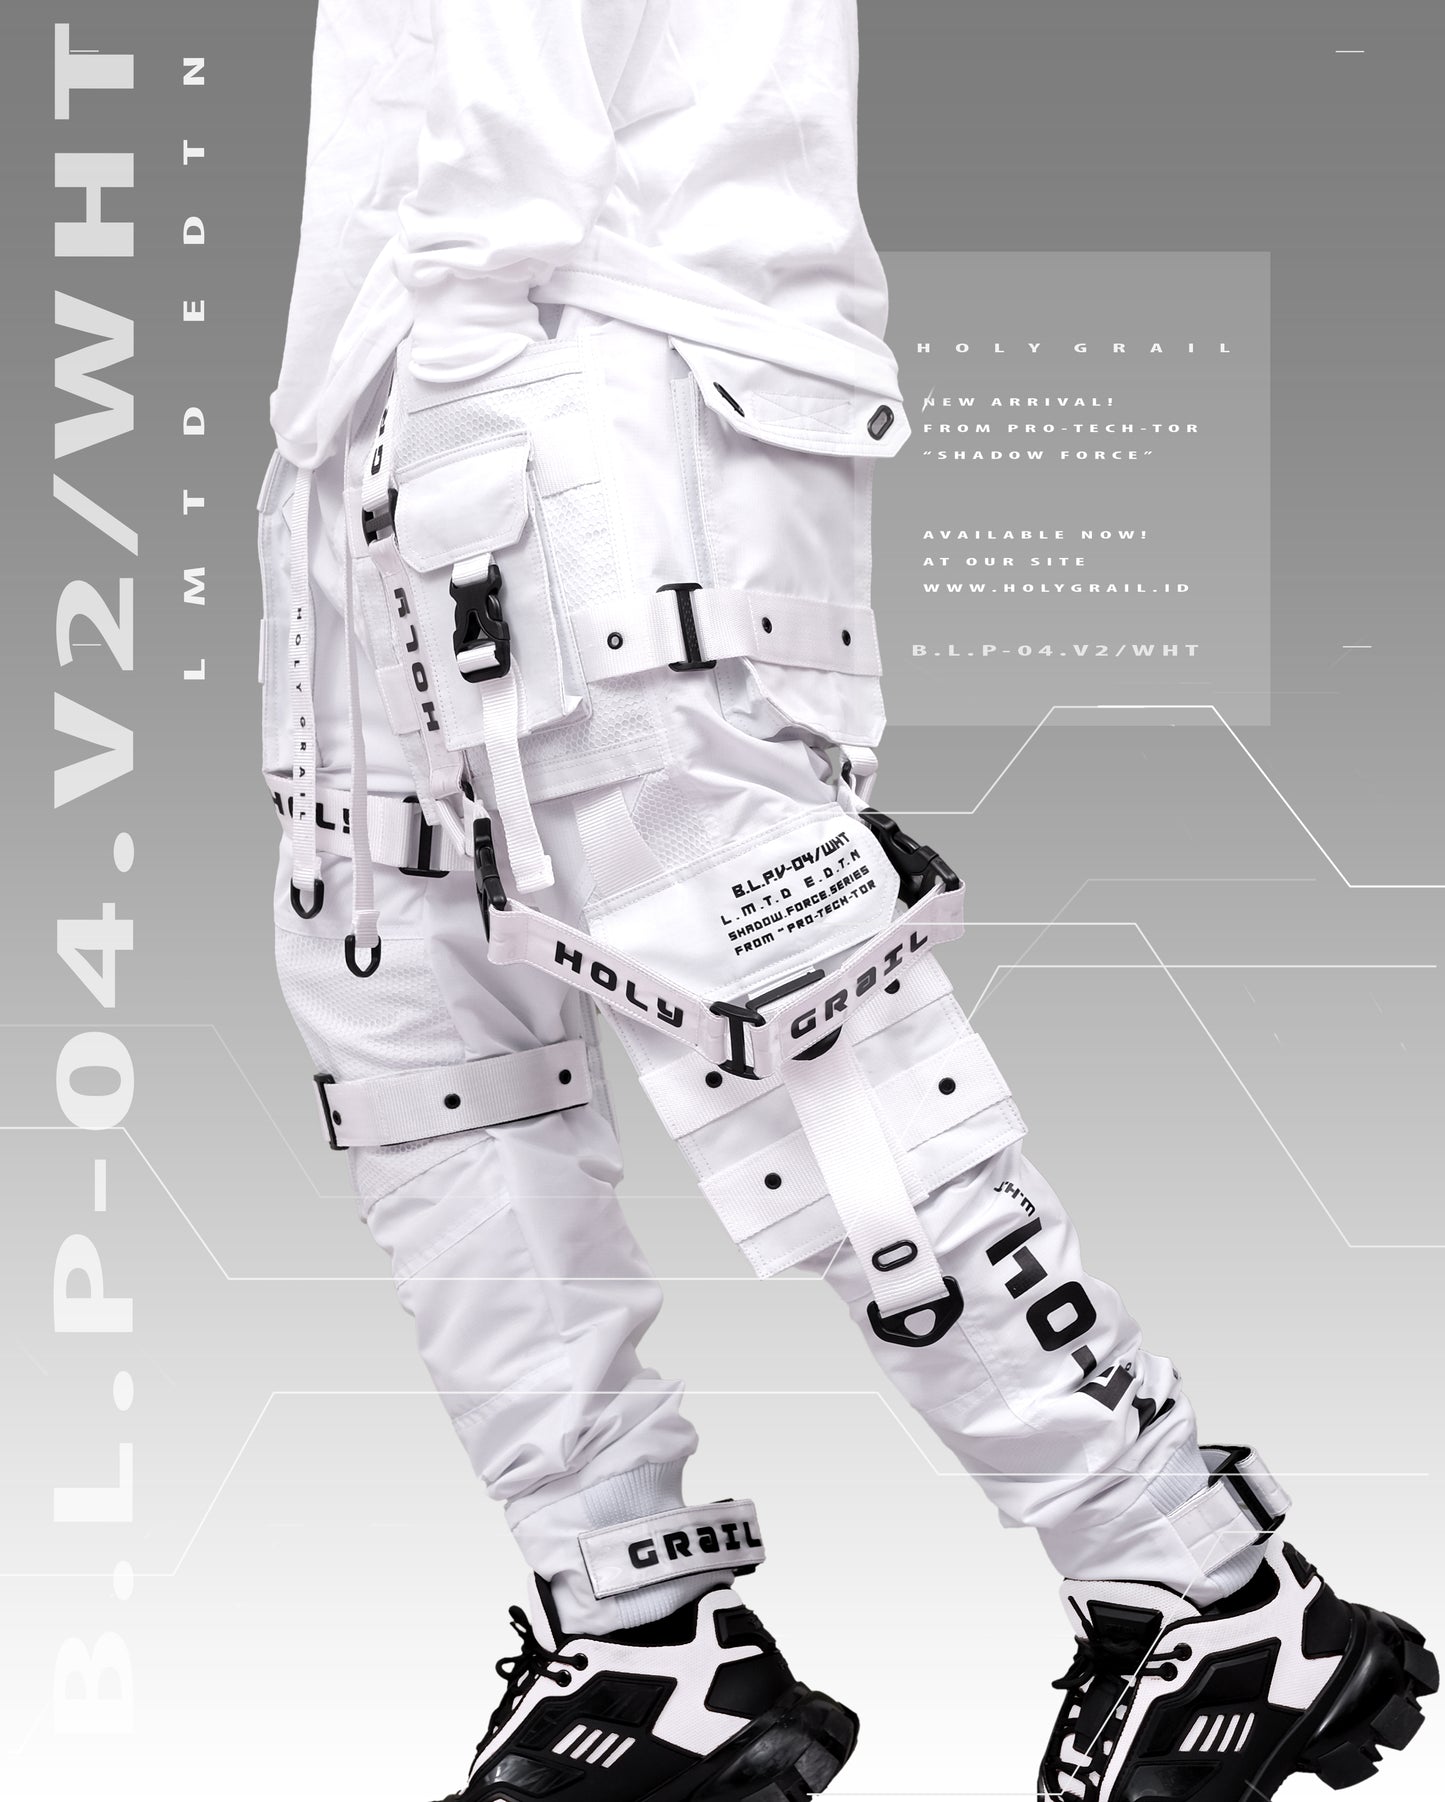 B.L.P-04.V2/WHT / LIMITED EDITION ! ( SOLD OUT! )